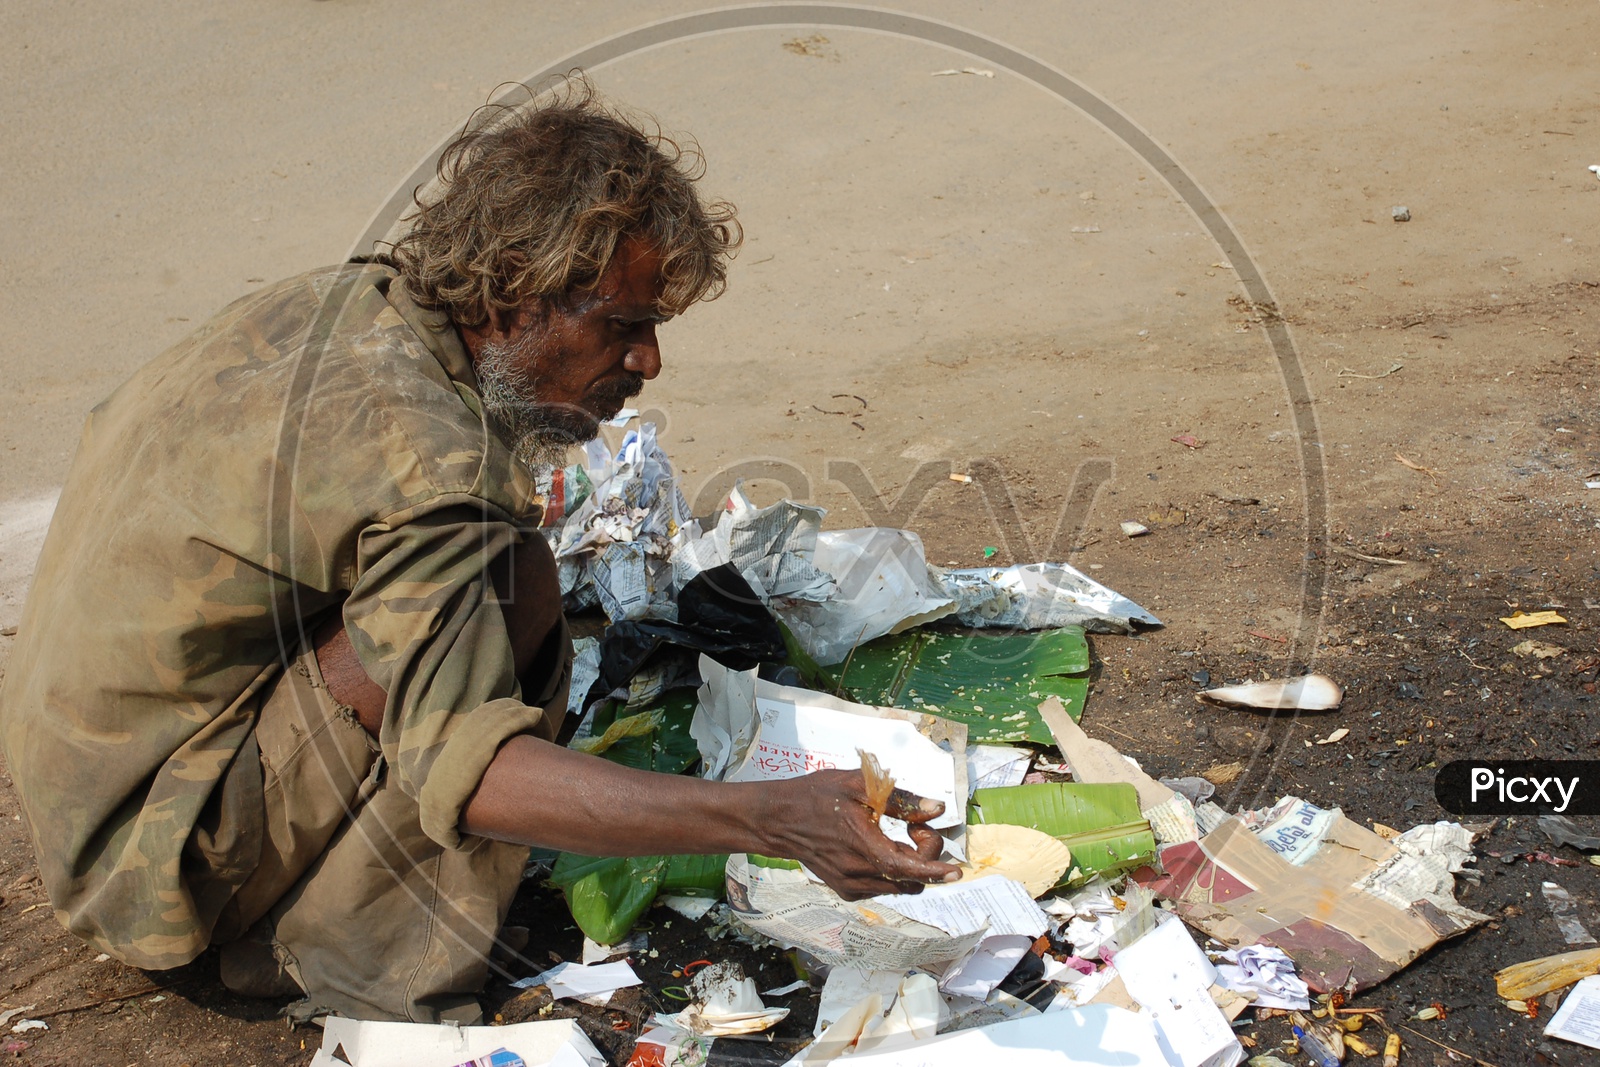 Indian Beggar collecting the Waste on the road